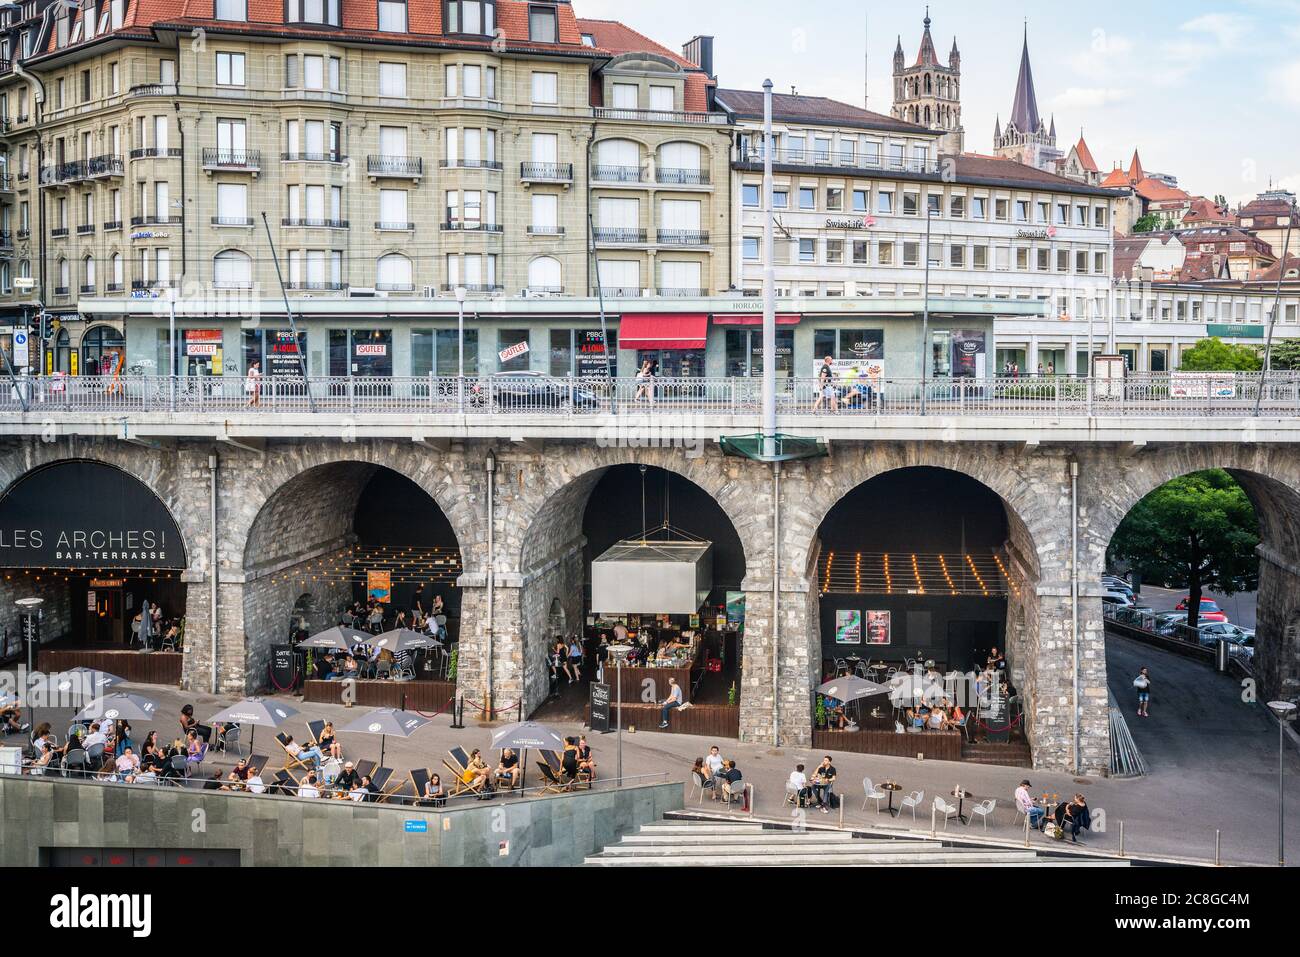 Lausanne Switzerland , 25 June 2020 : Les arches a bar with a terrace full of people under Grand-Pont bridge arches and city view during 2020 covid cr Stock Photo